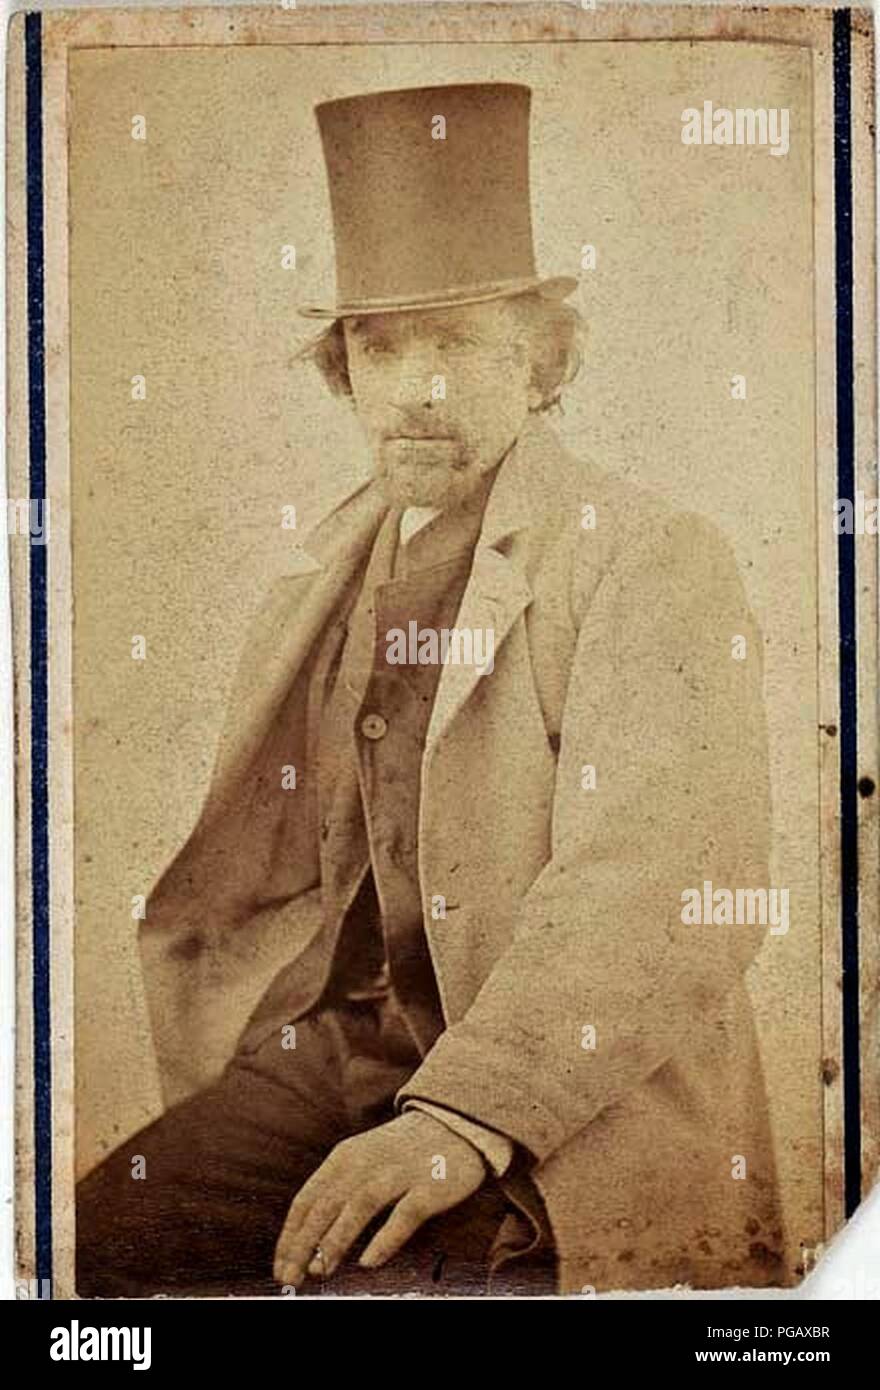 Auguste Rodin wearing a top hat, c1862, Charles Hippolyte Aubry. Stock Photo